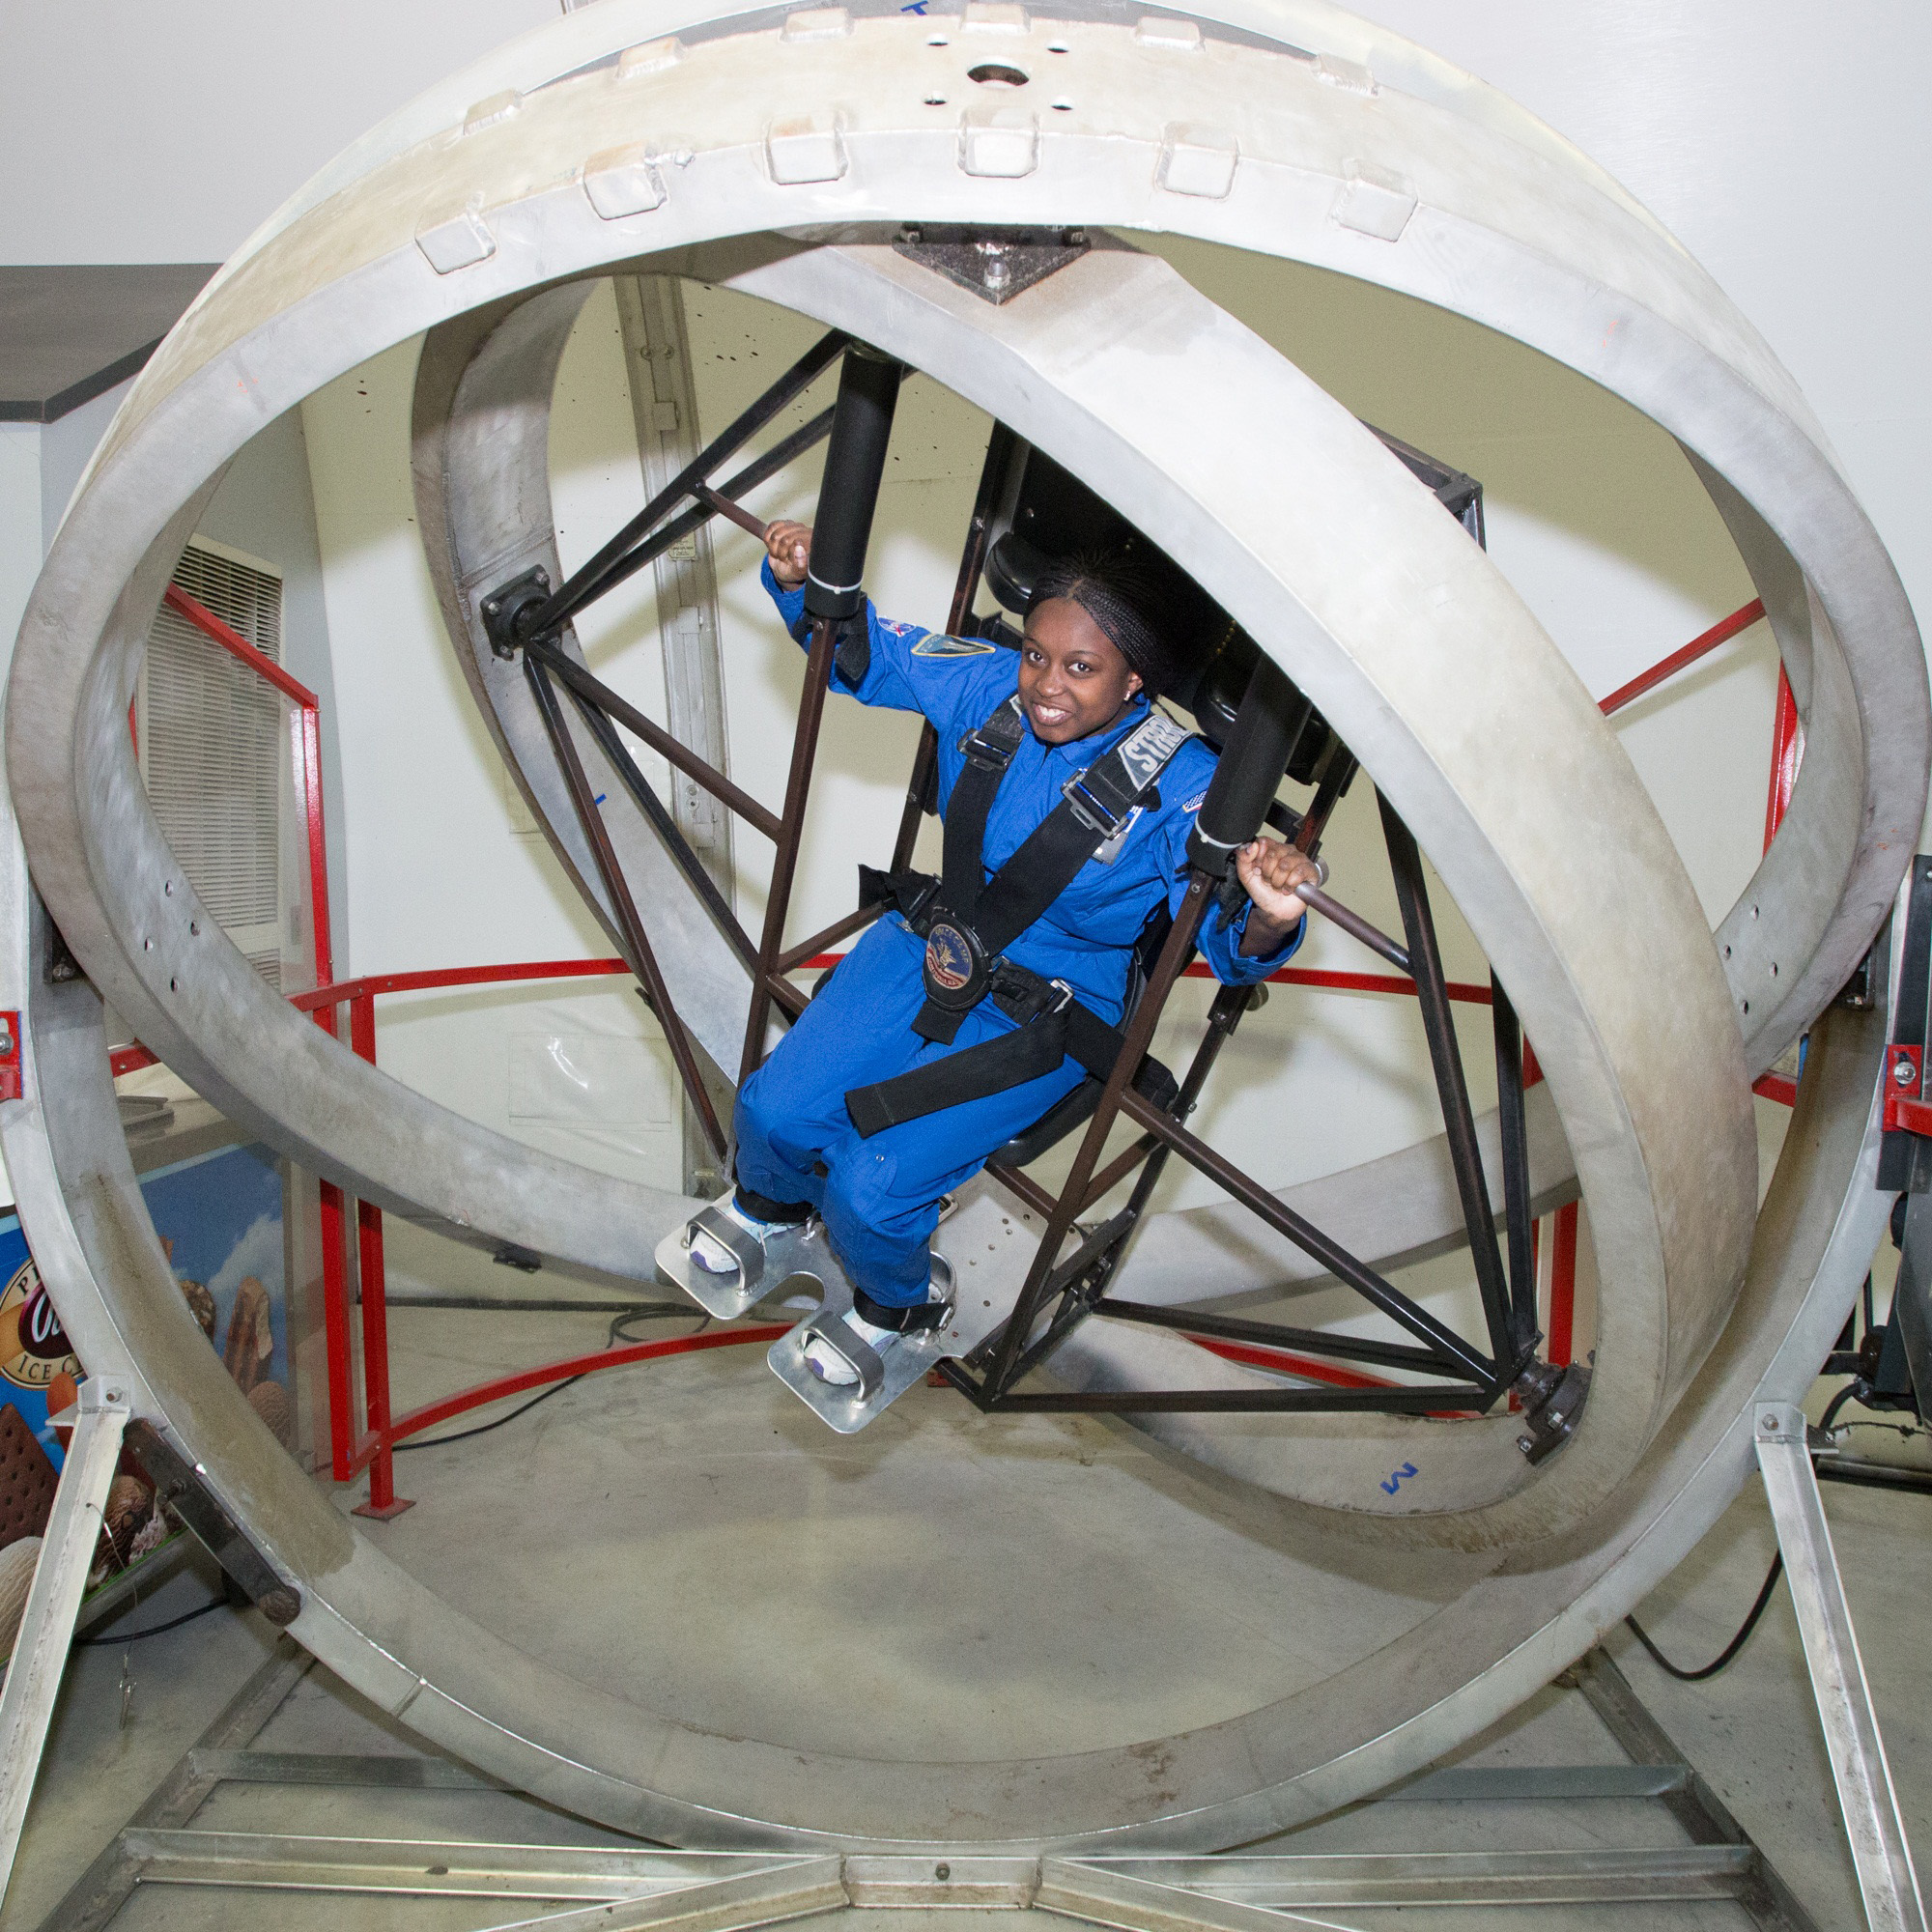 Honeywell Leadership Challenge Academy participants are able to go for a spin in simulated astronaut training exercises.